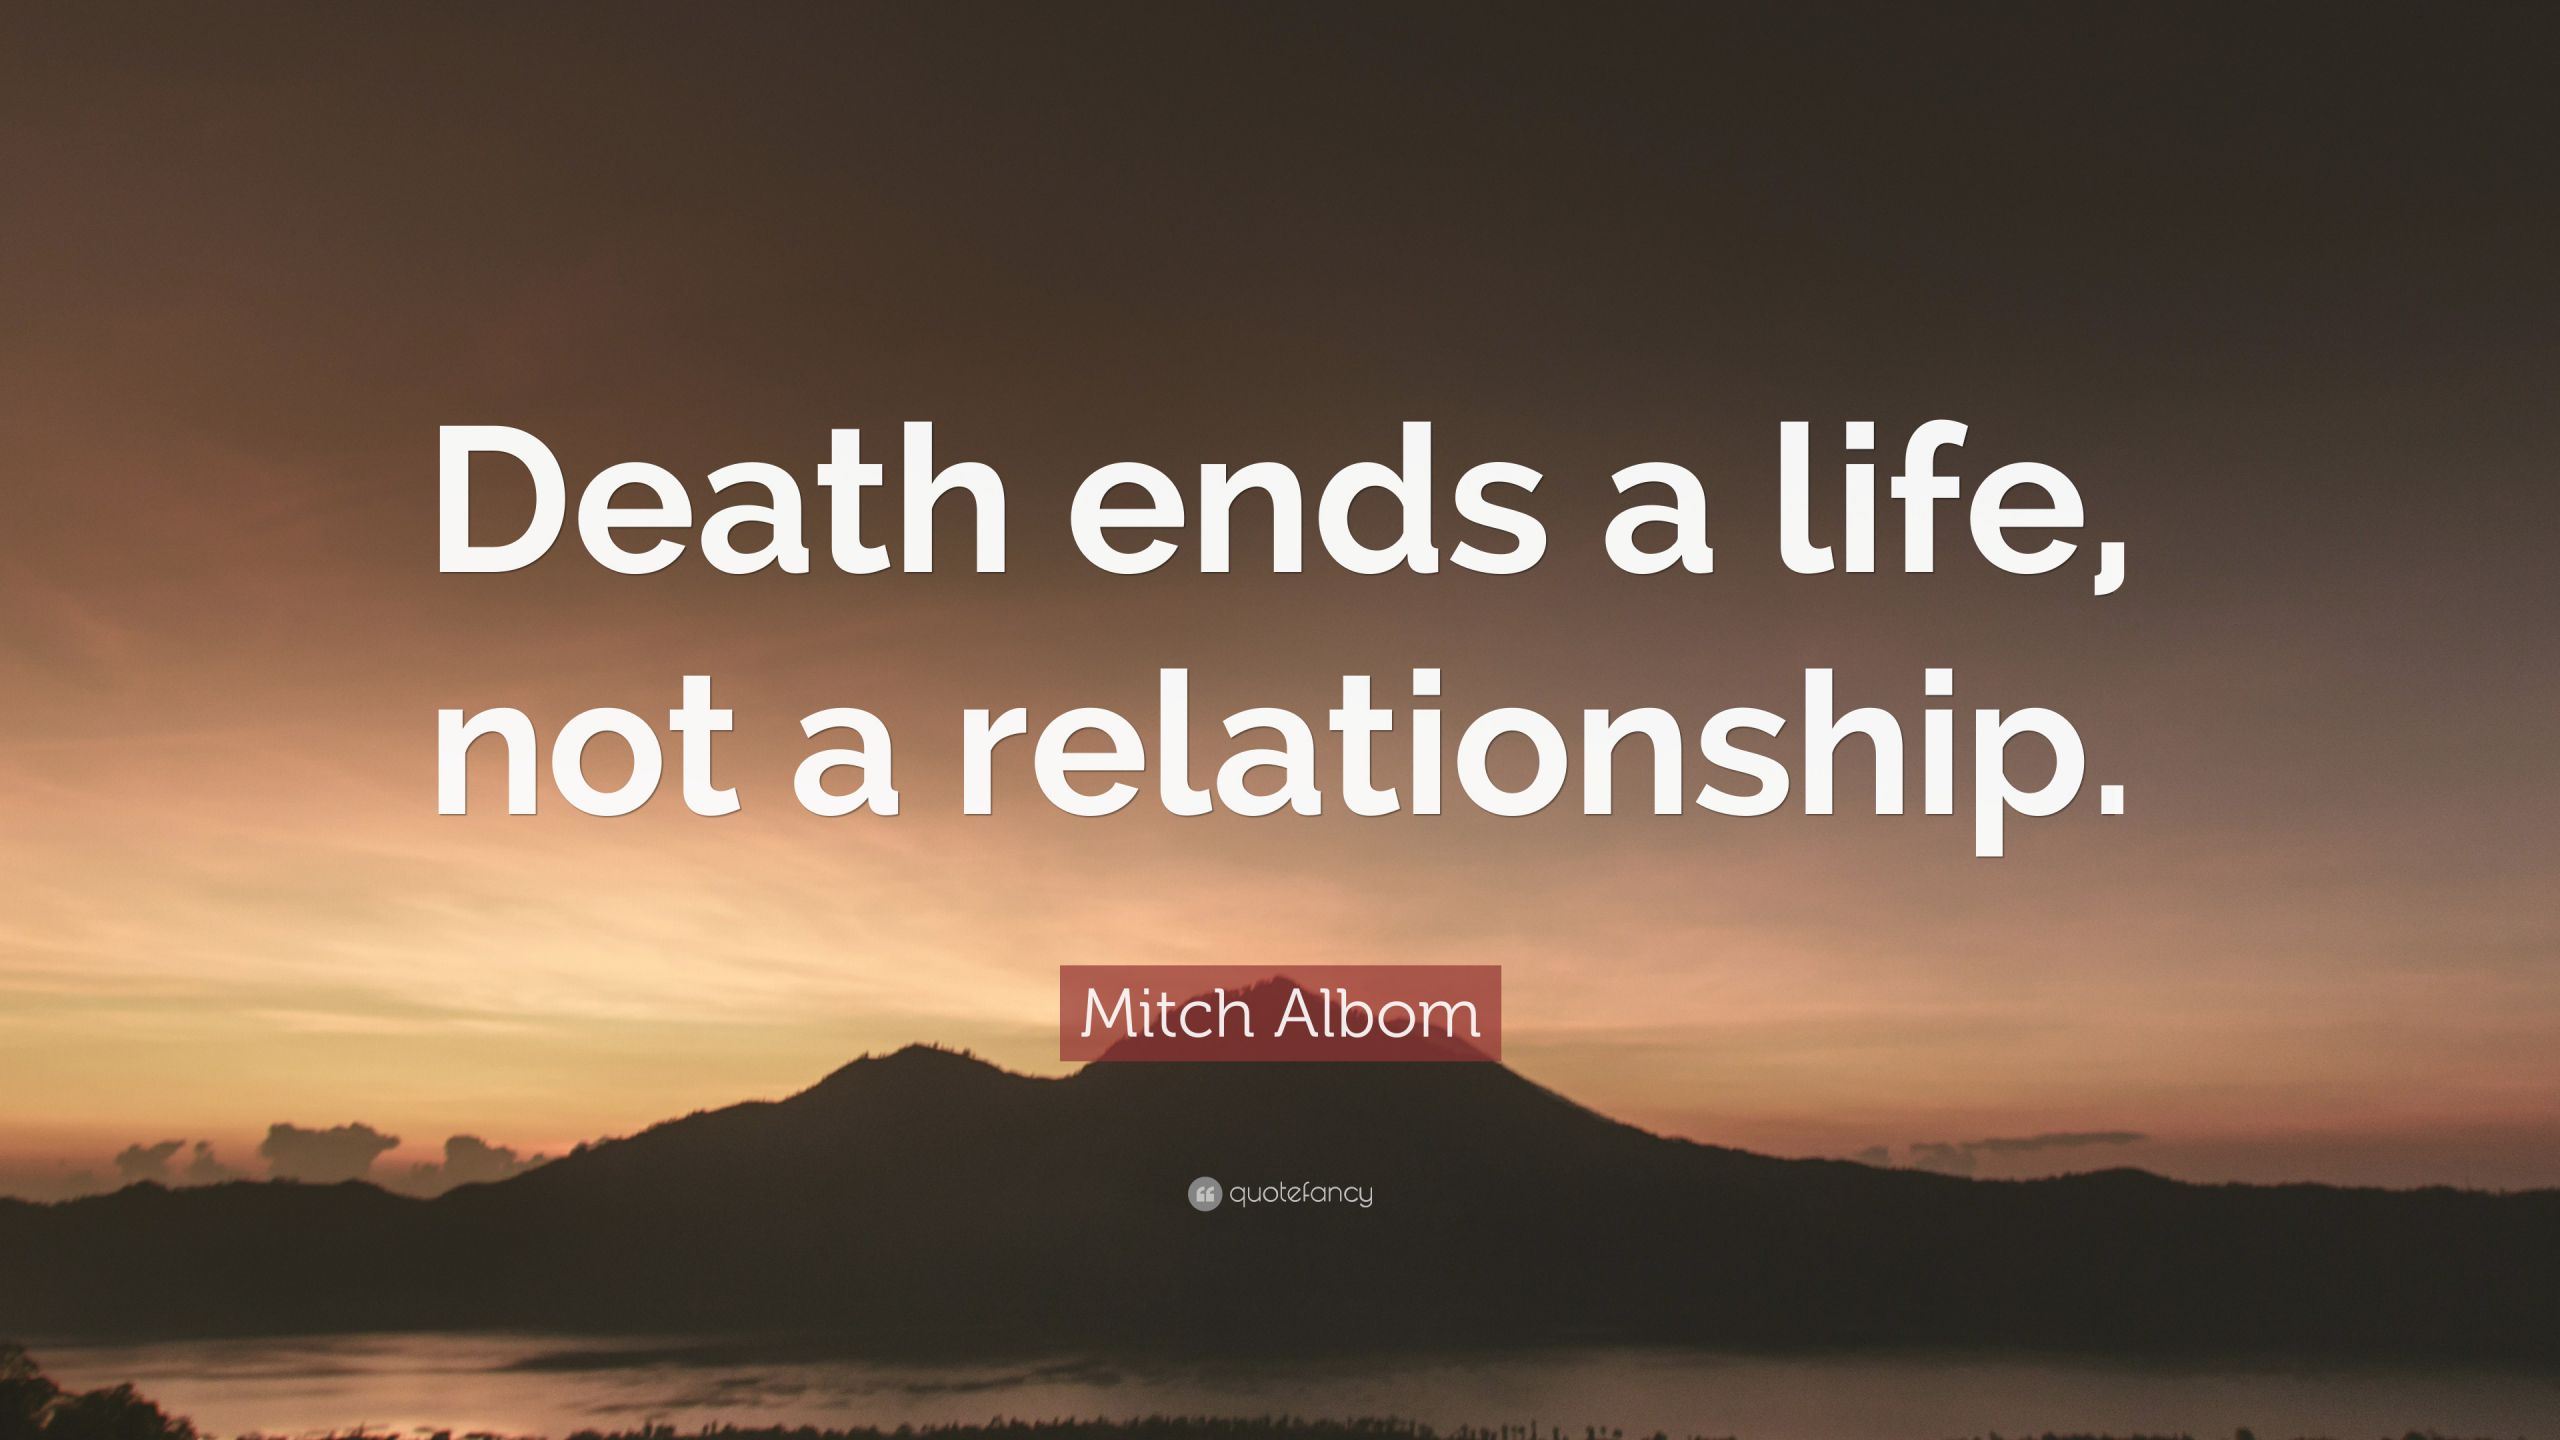 Quotes About Love And Death
 Mitch Albom Quote “Death ends a life not a relationship